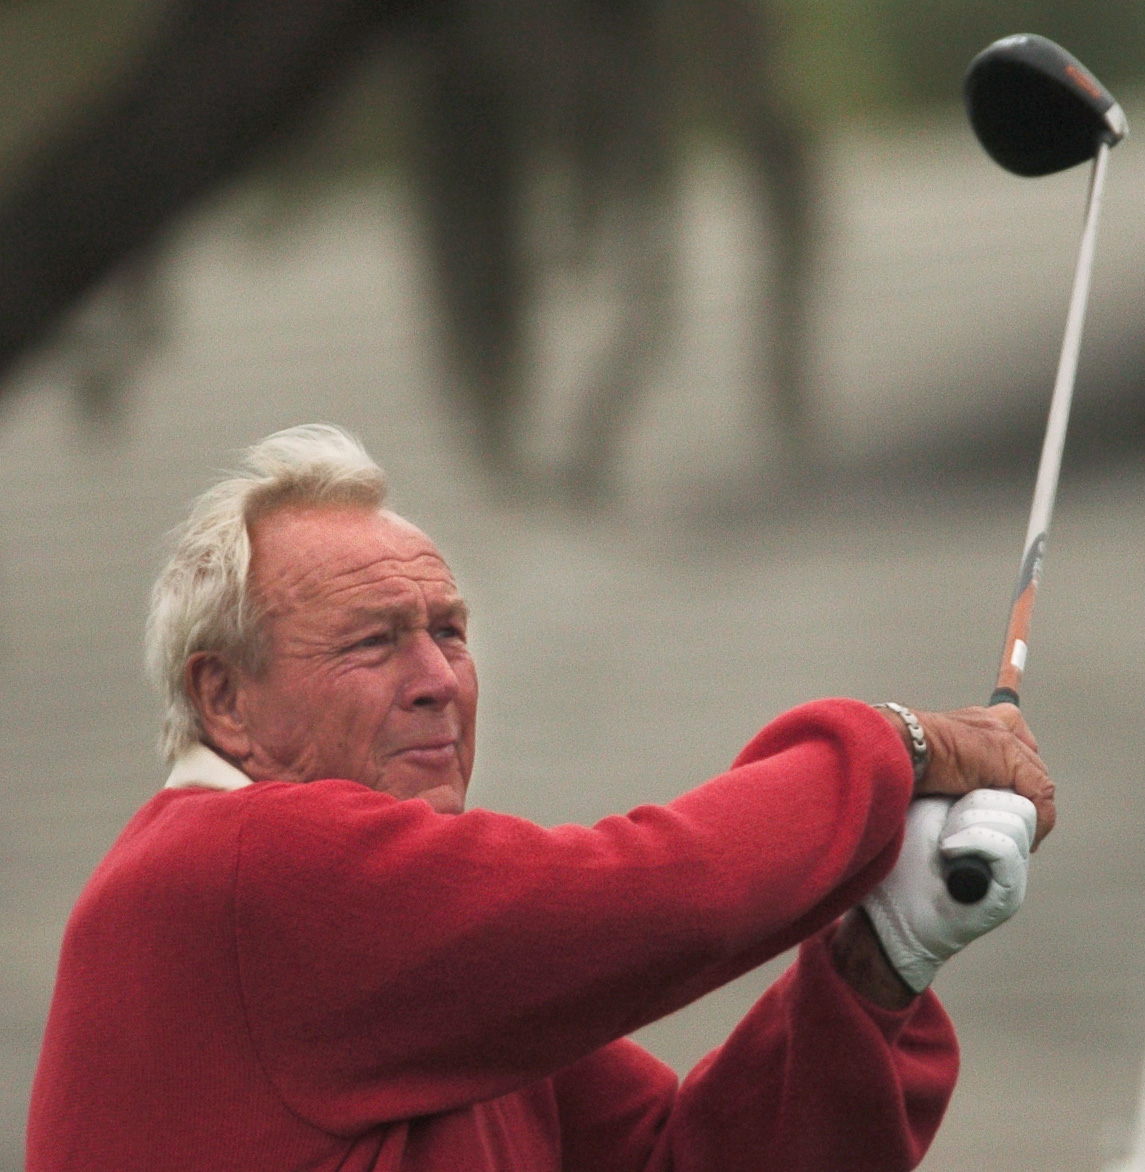 Arnold Palmer hits his drive off the #1 tee box during the Bay Hill Invitational Pro-AM in Orlando, FL Tuesday, March 15, 2005. (Gary W. Green/Orlando Sentinel) ORG XMIT: ORL0503151316159333